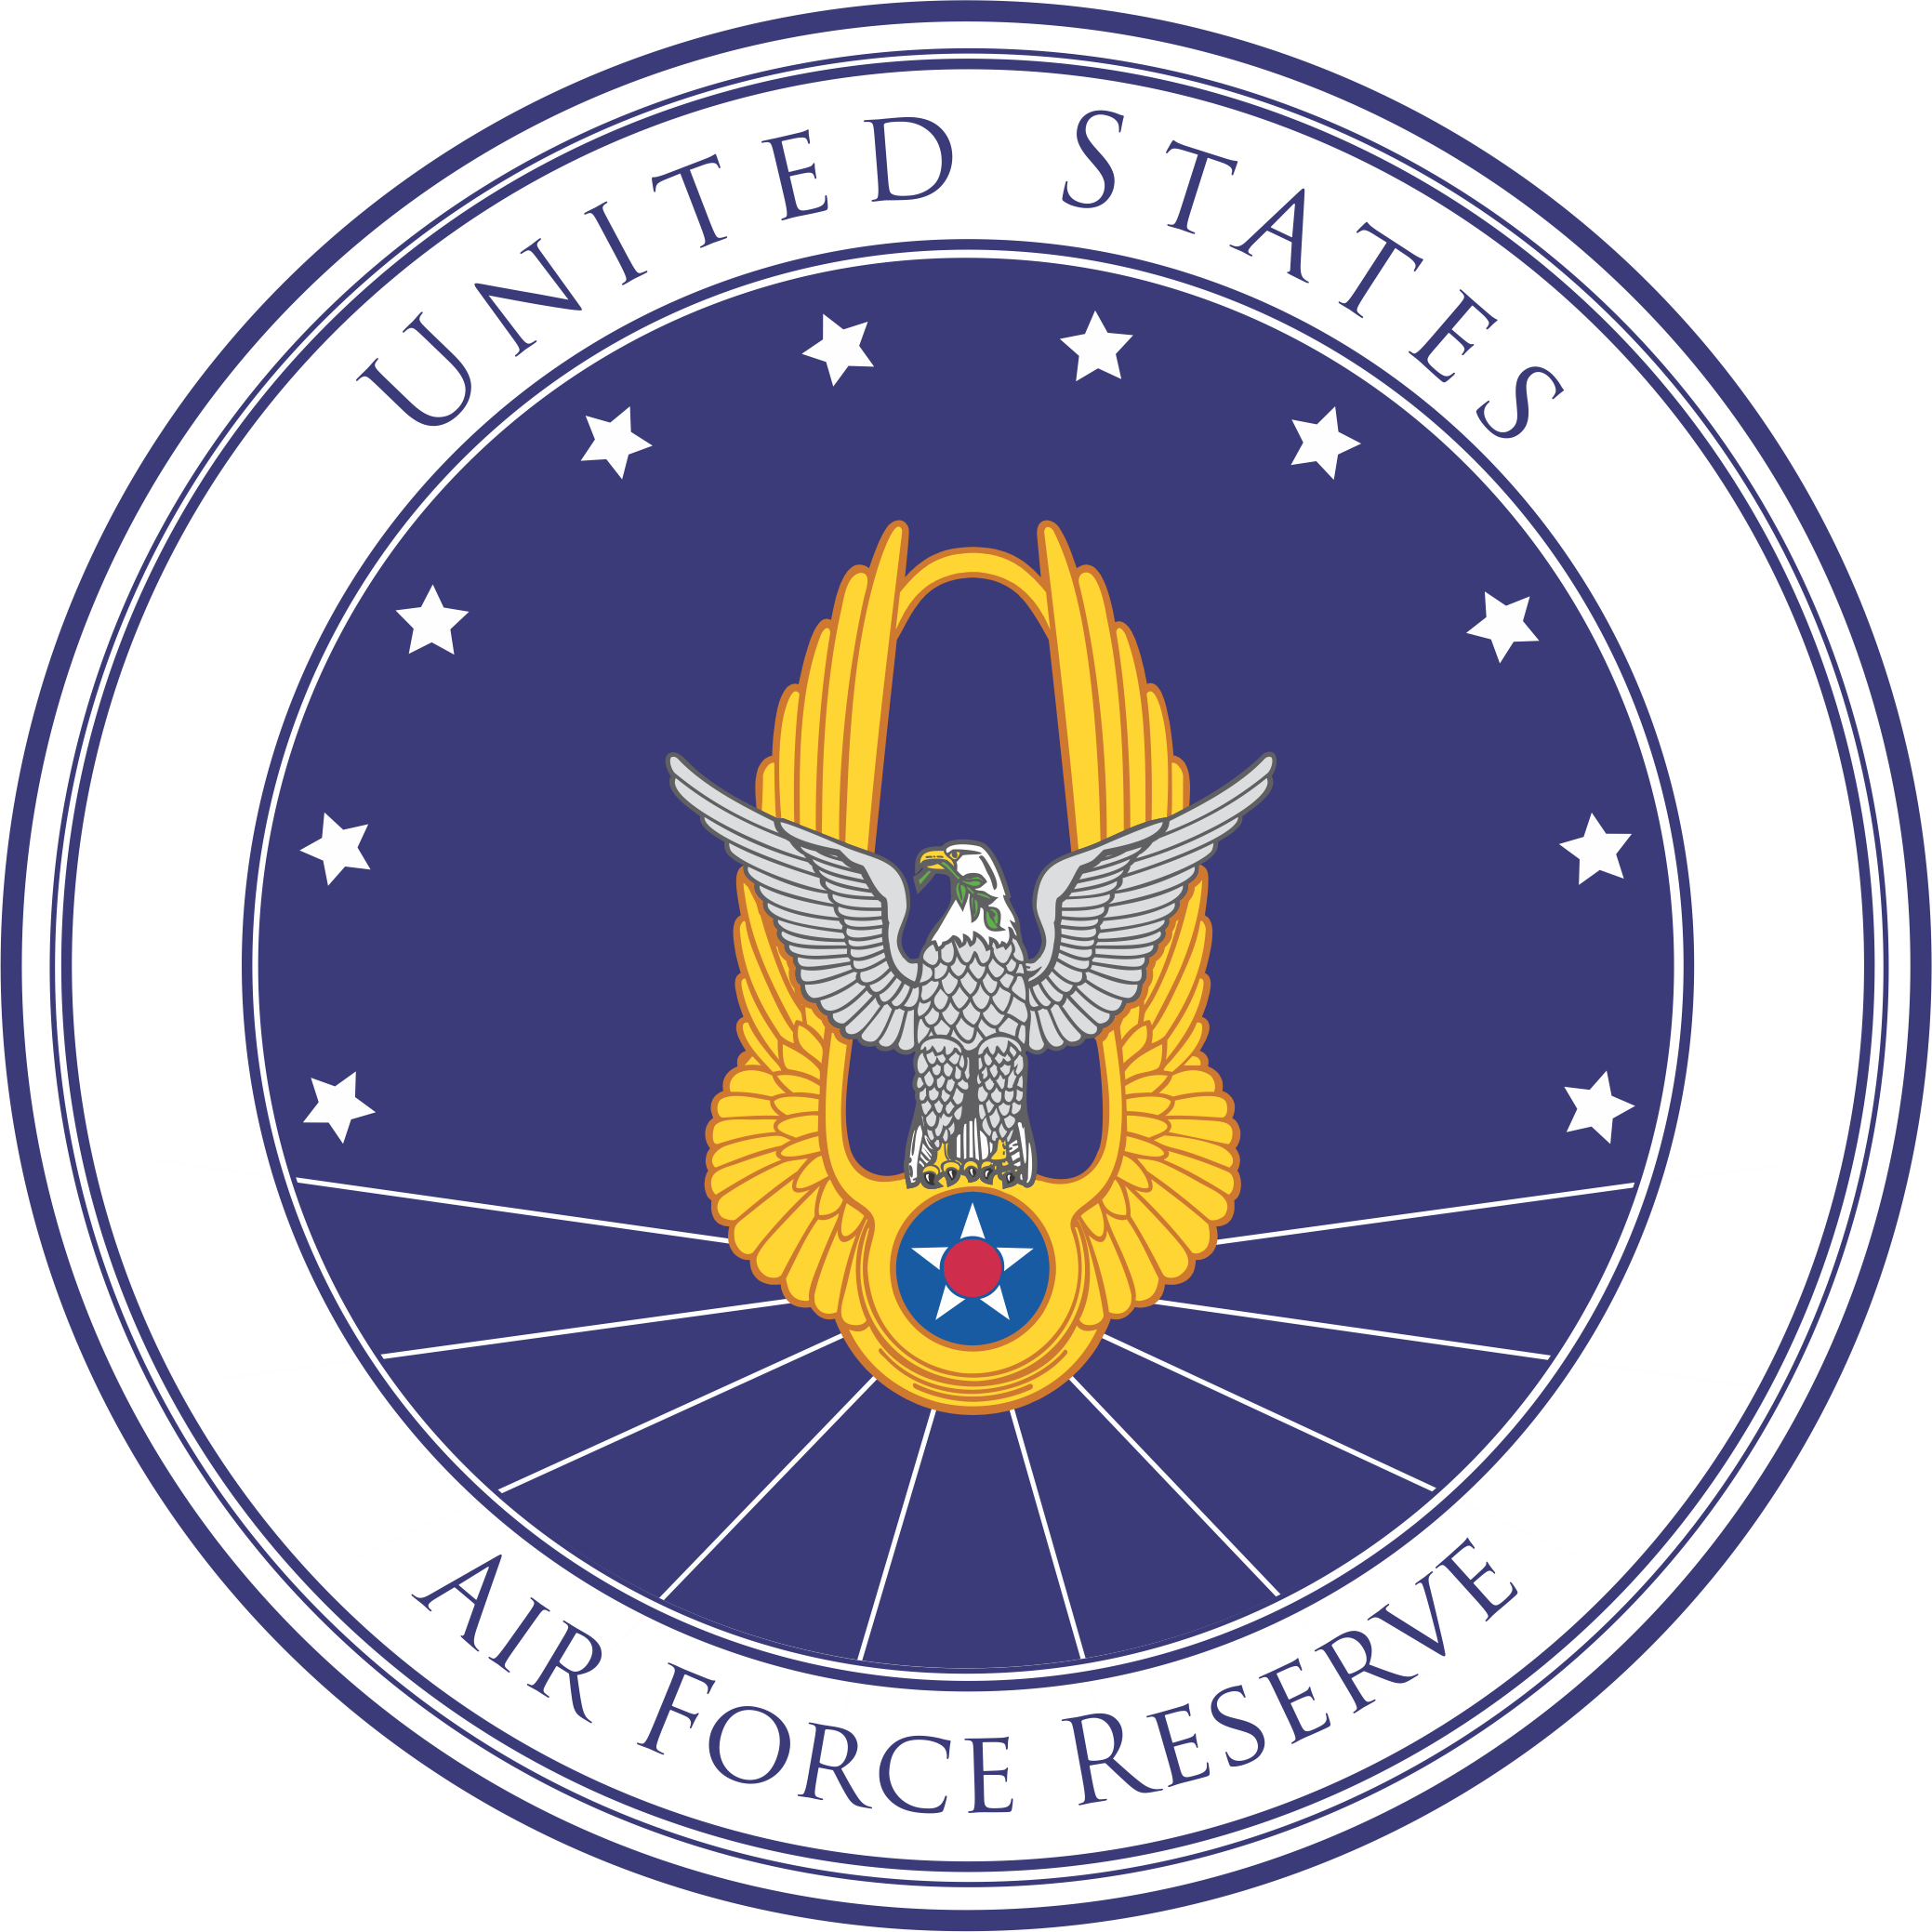 United States Air Force Reserve seal